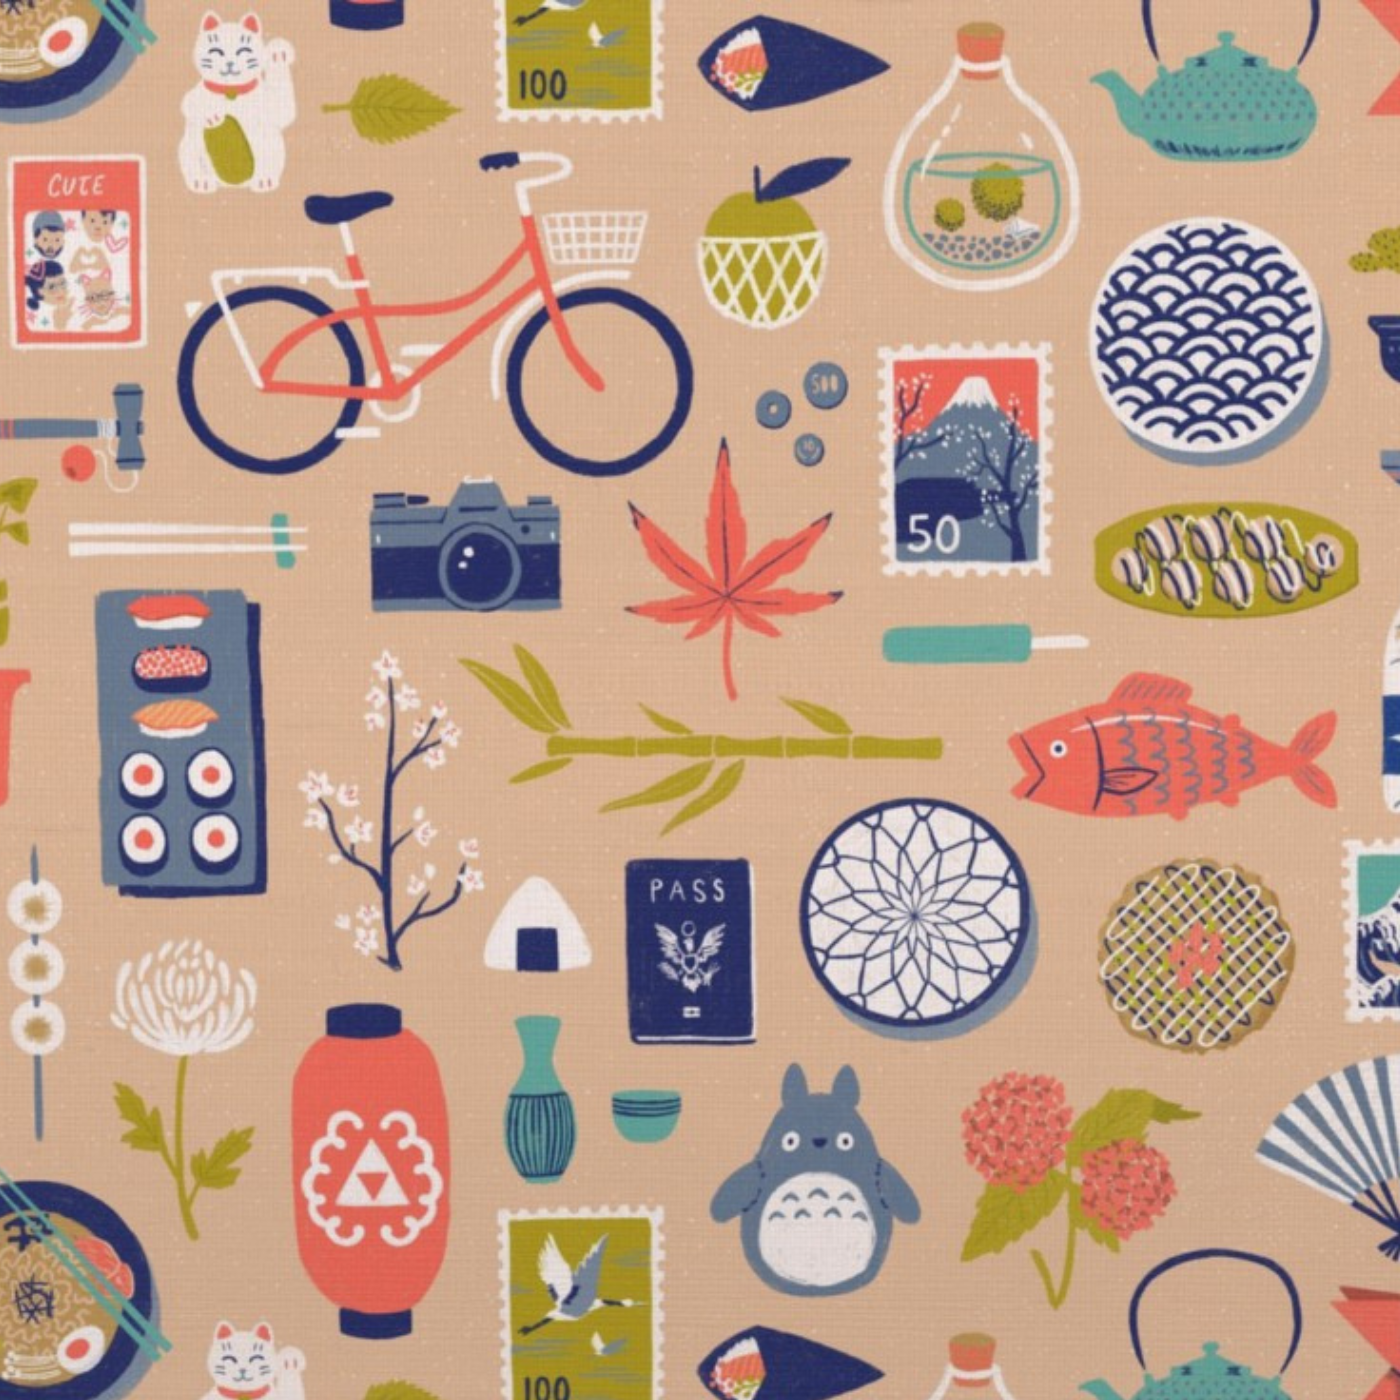 A design with a peach background with various cultural elements from Japan throughout, featuring postage stamps, some with white-and-gray birds, some with a large snow-capped mountain; a cherry blossom branch; turquoise teapots; bamboo branches; bicycles with baskets; mounds a rice; cameras; passports and more.